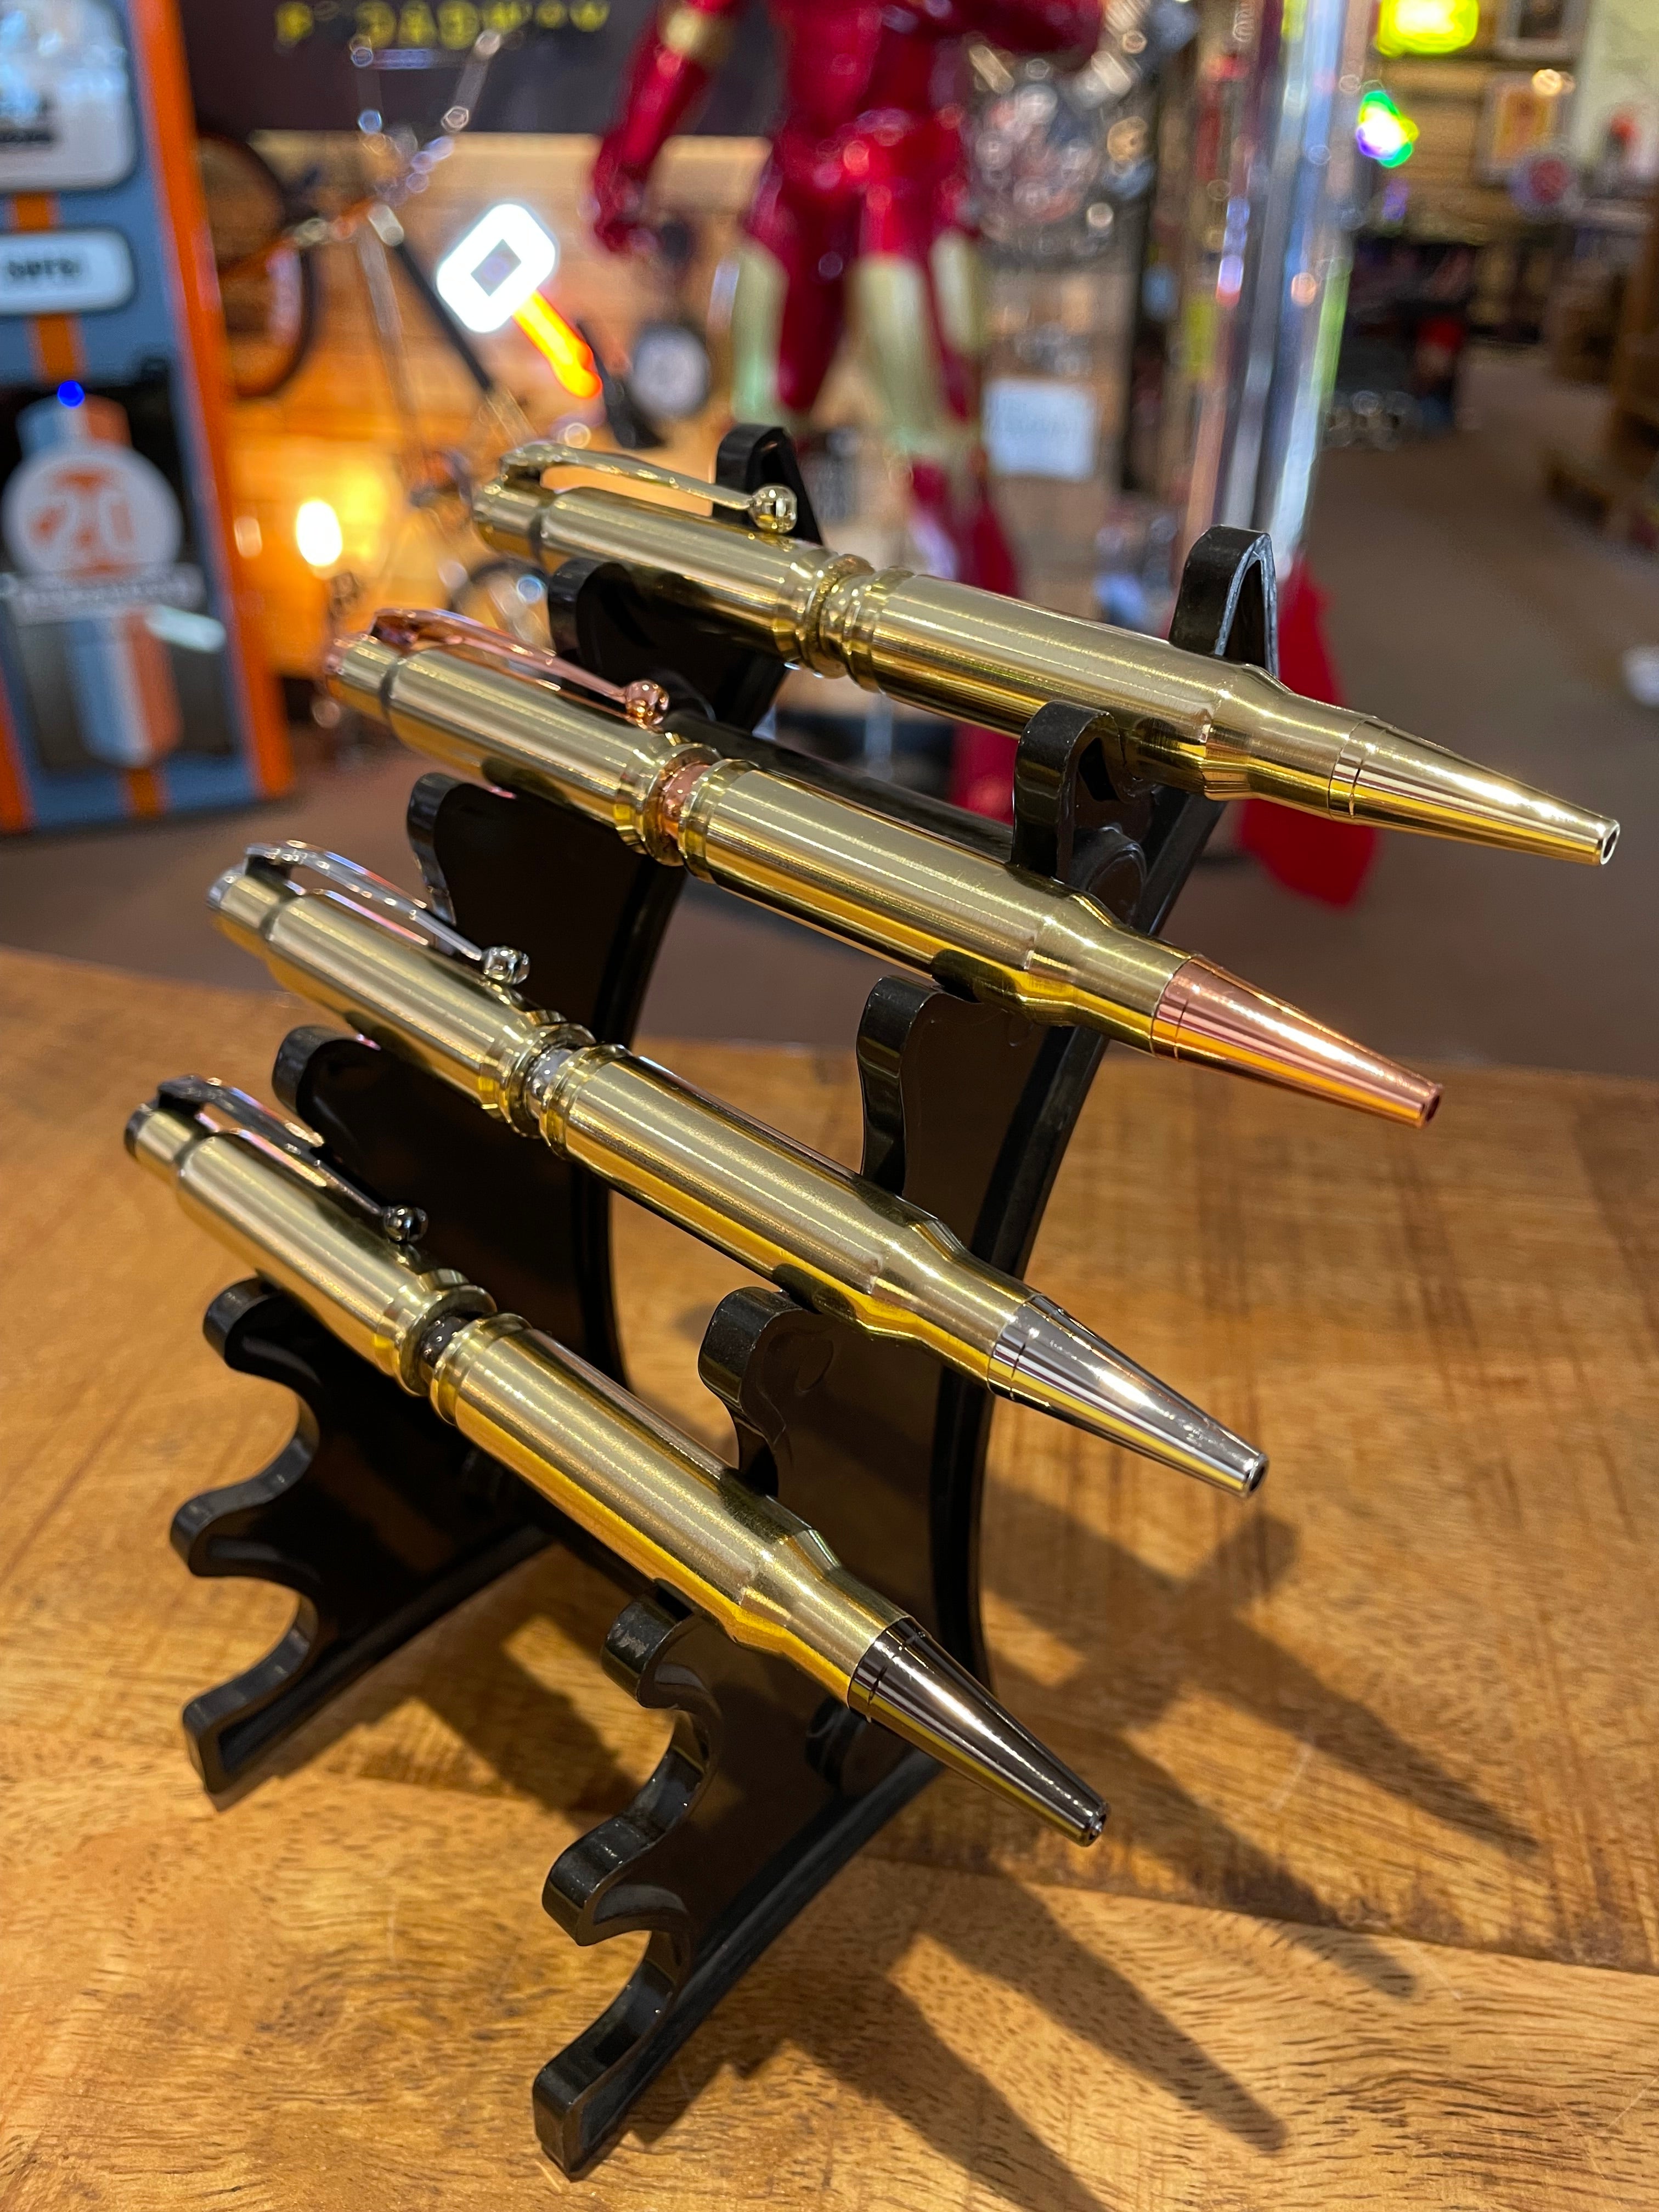 Genuine Hand Crafted Bullet Pens